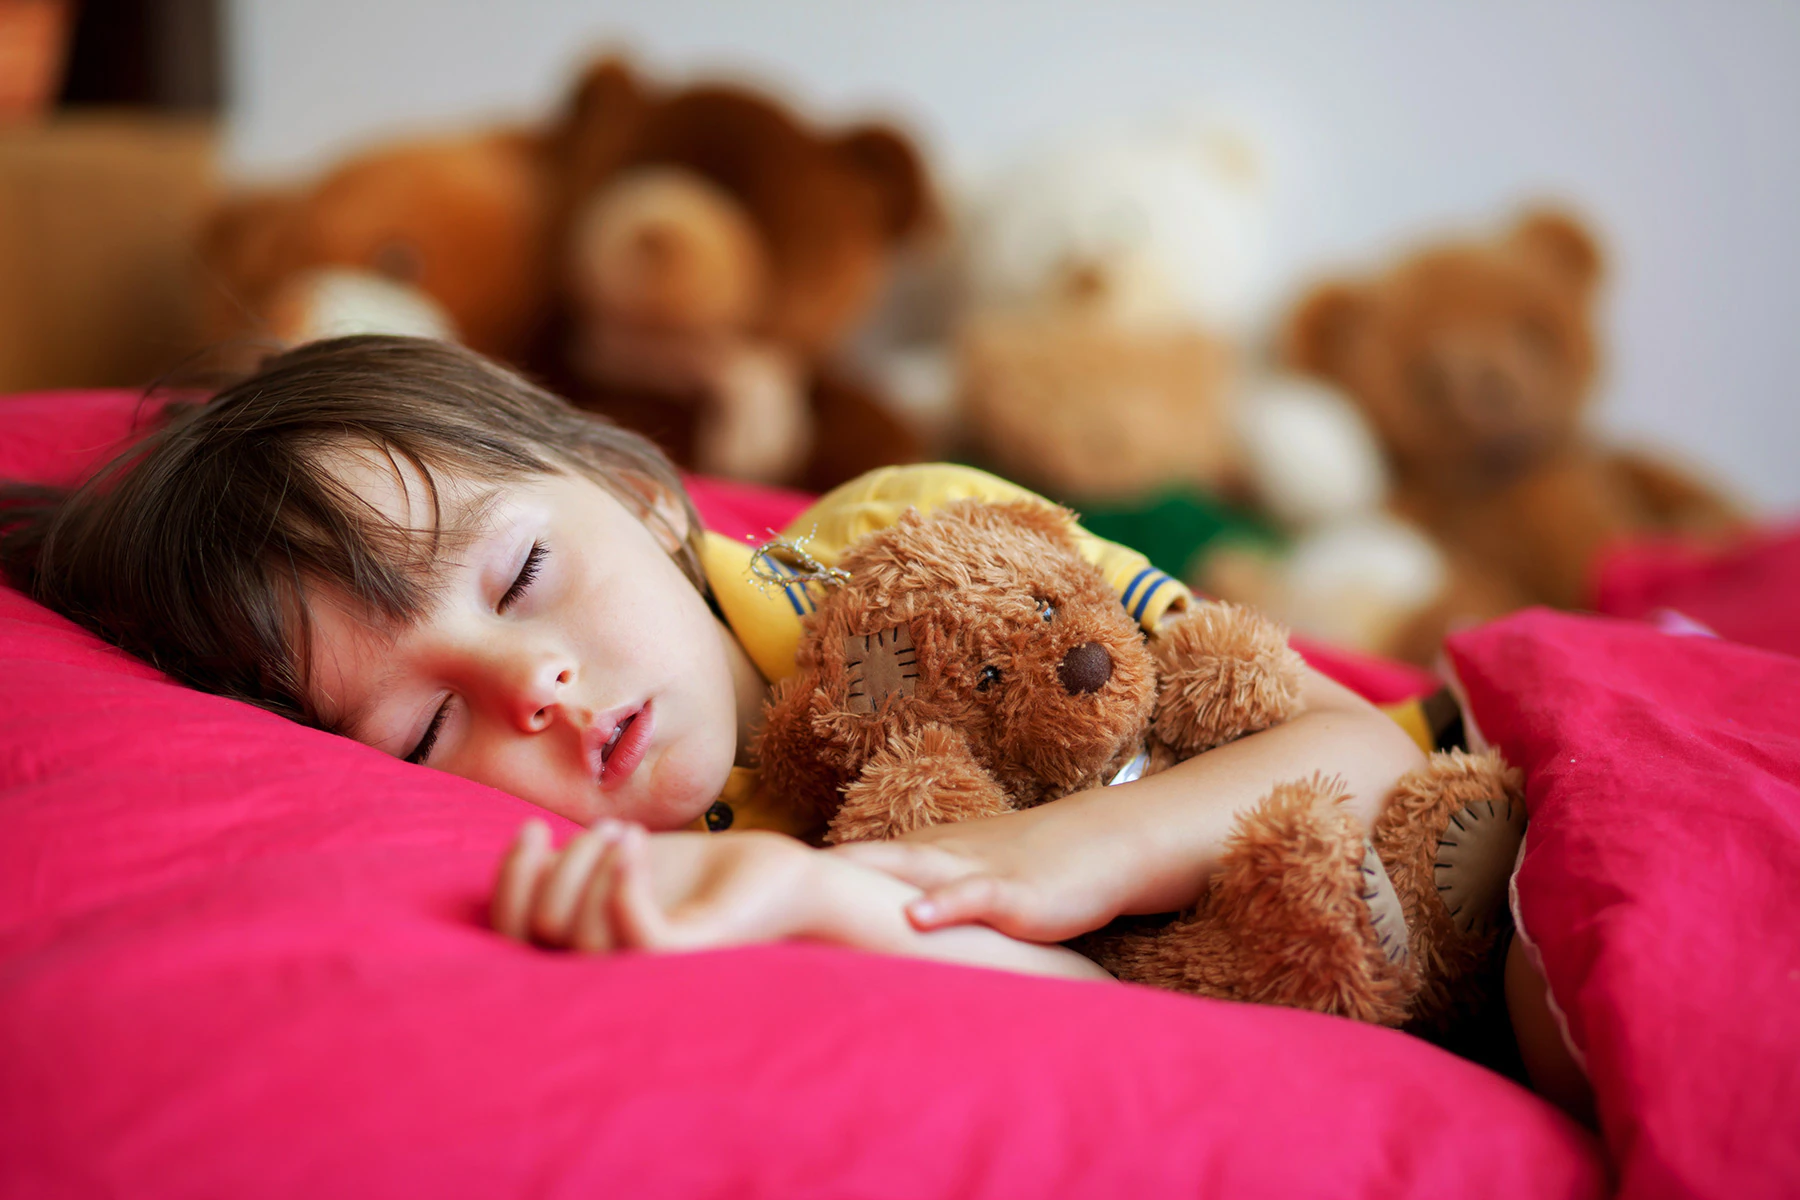 How Is COVID-19 Affecting Our Sleep?